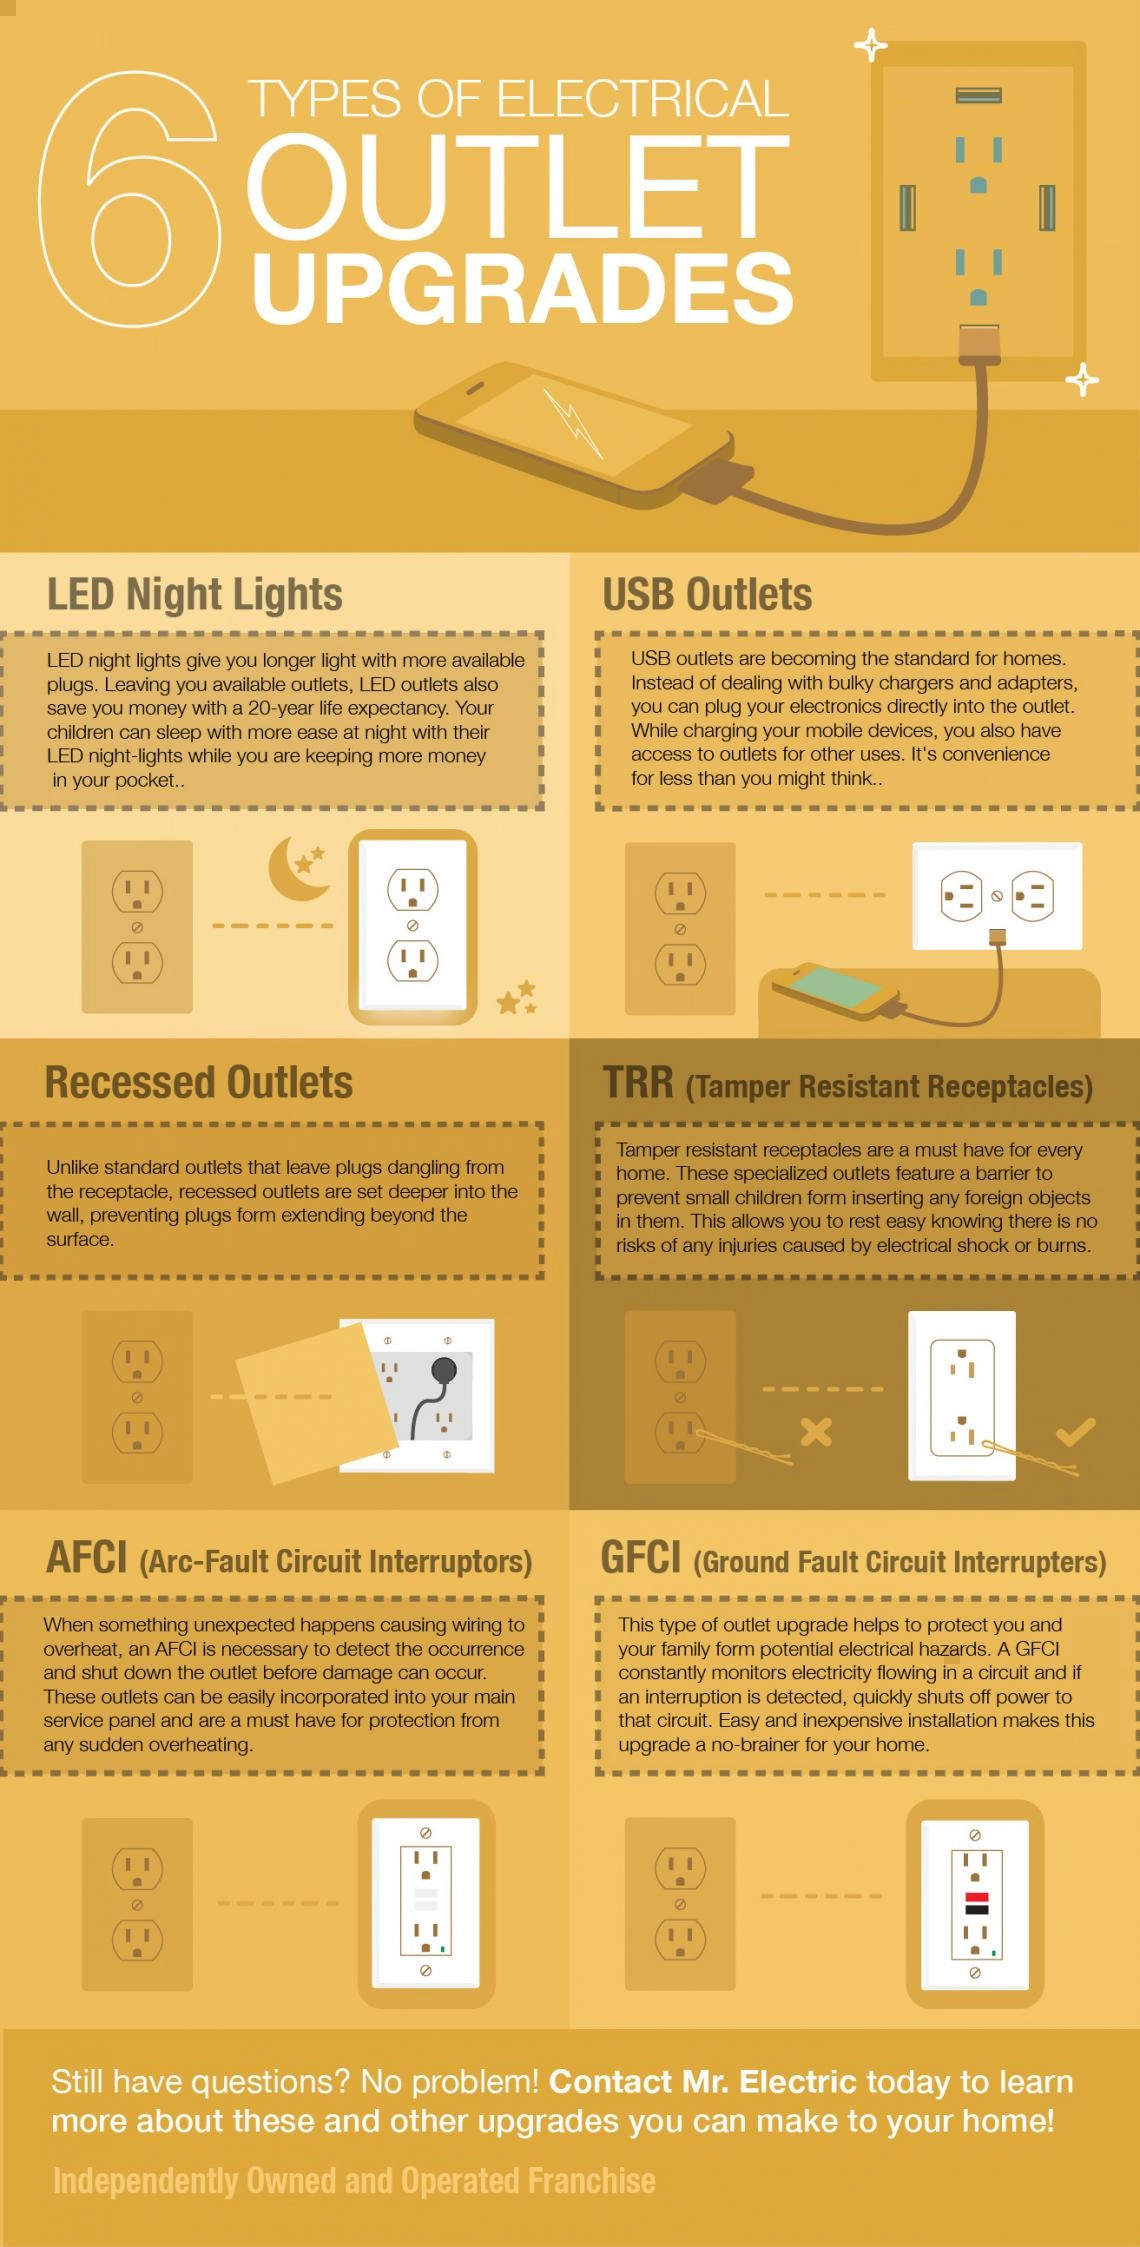 6 types of electrical outlet upgrades.